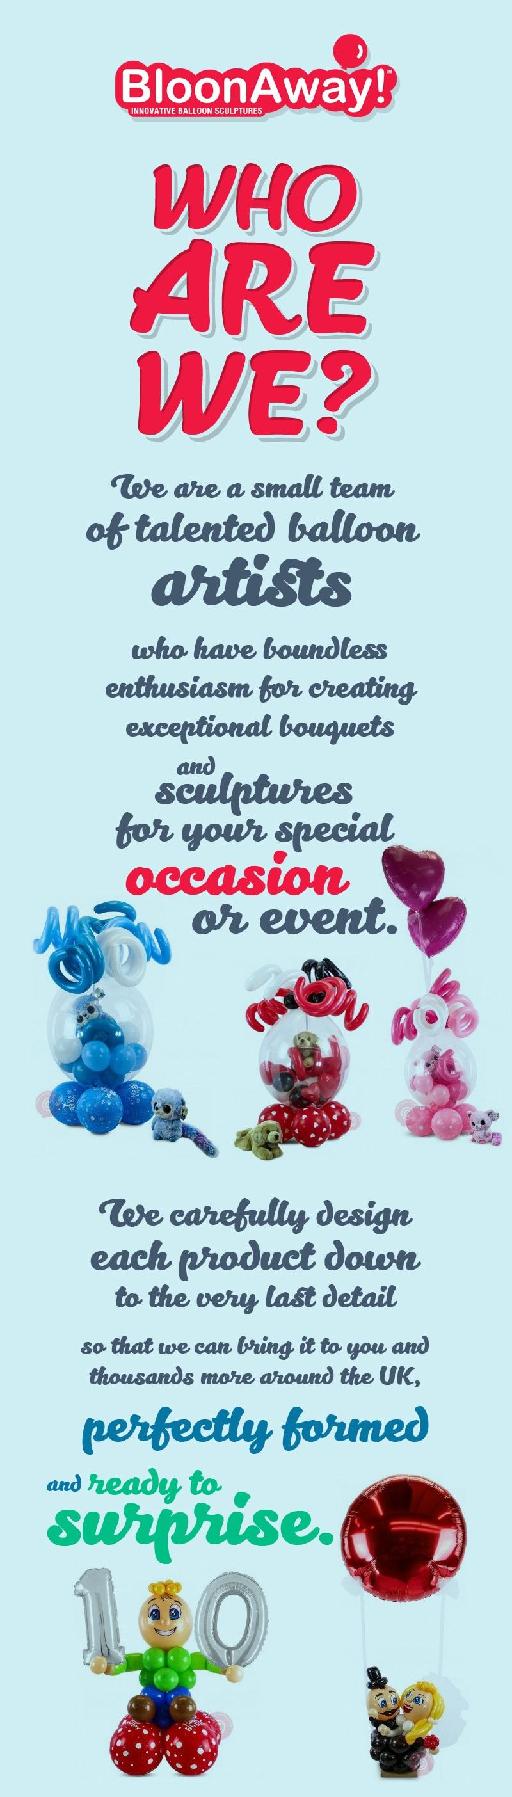 Order Pre-Inflated Balloons, Bouquets and Sculptures